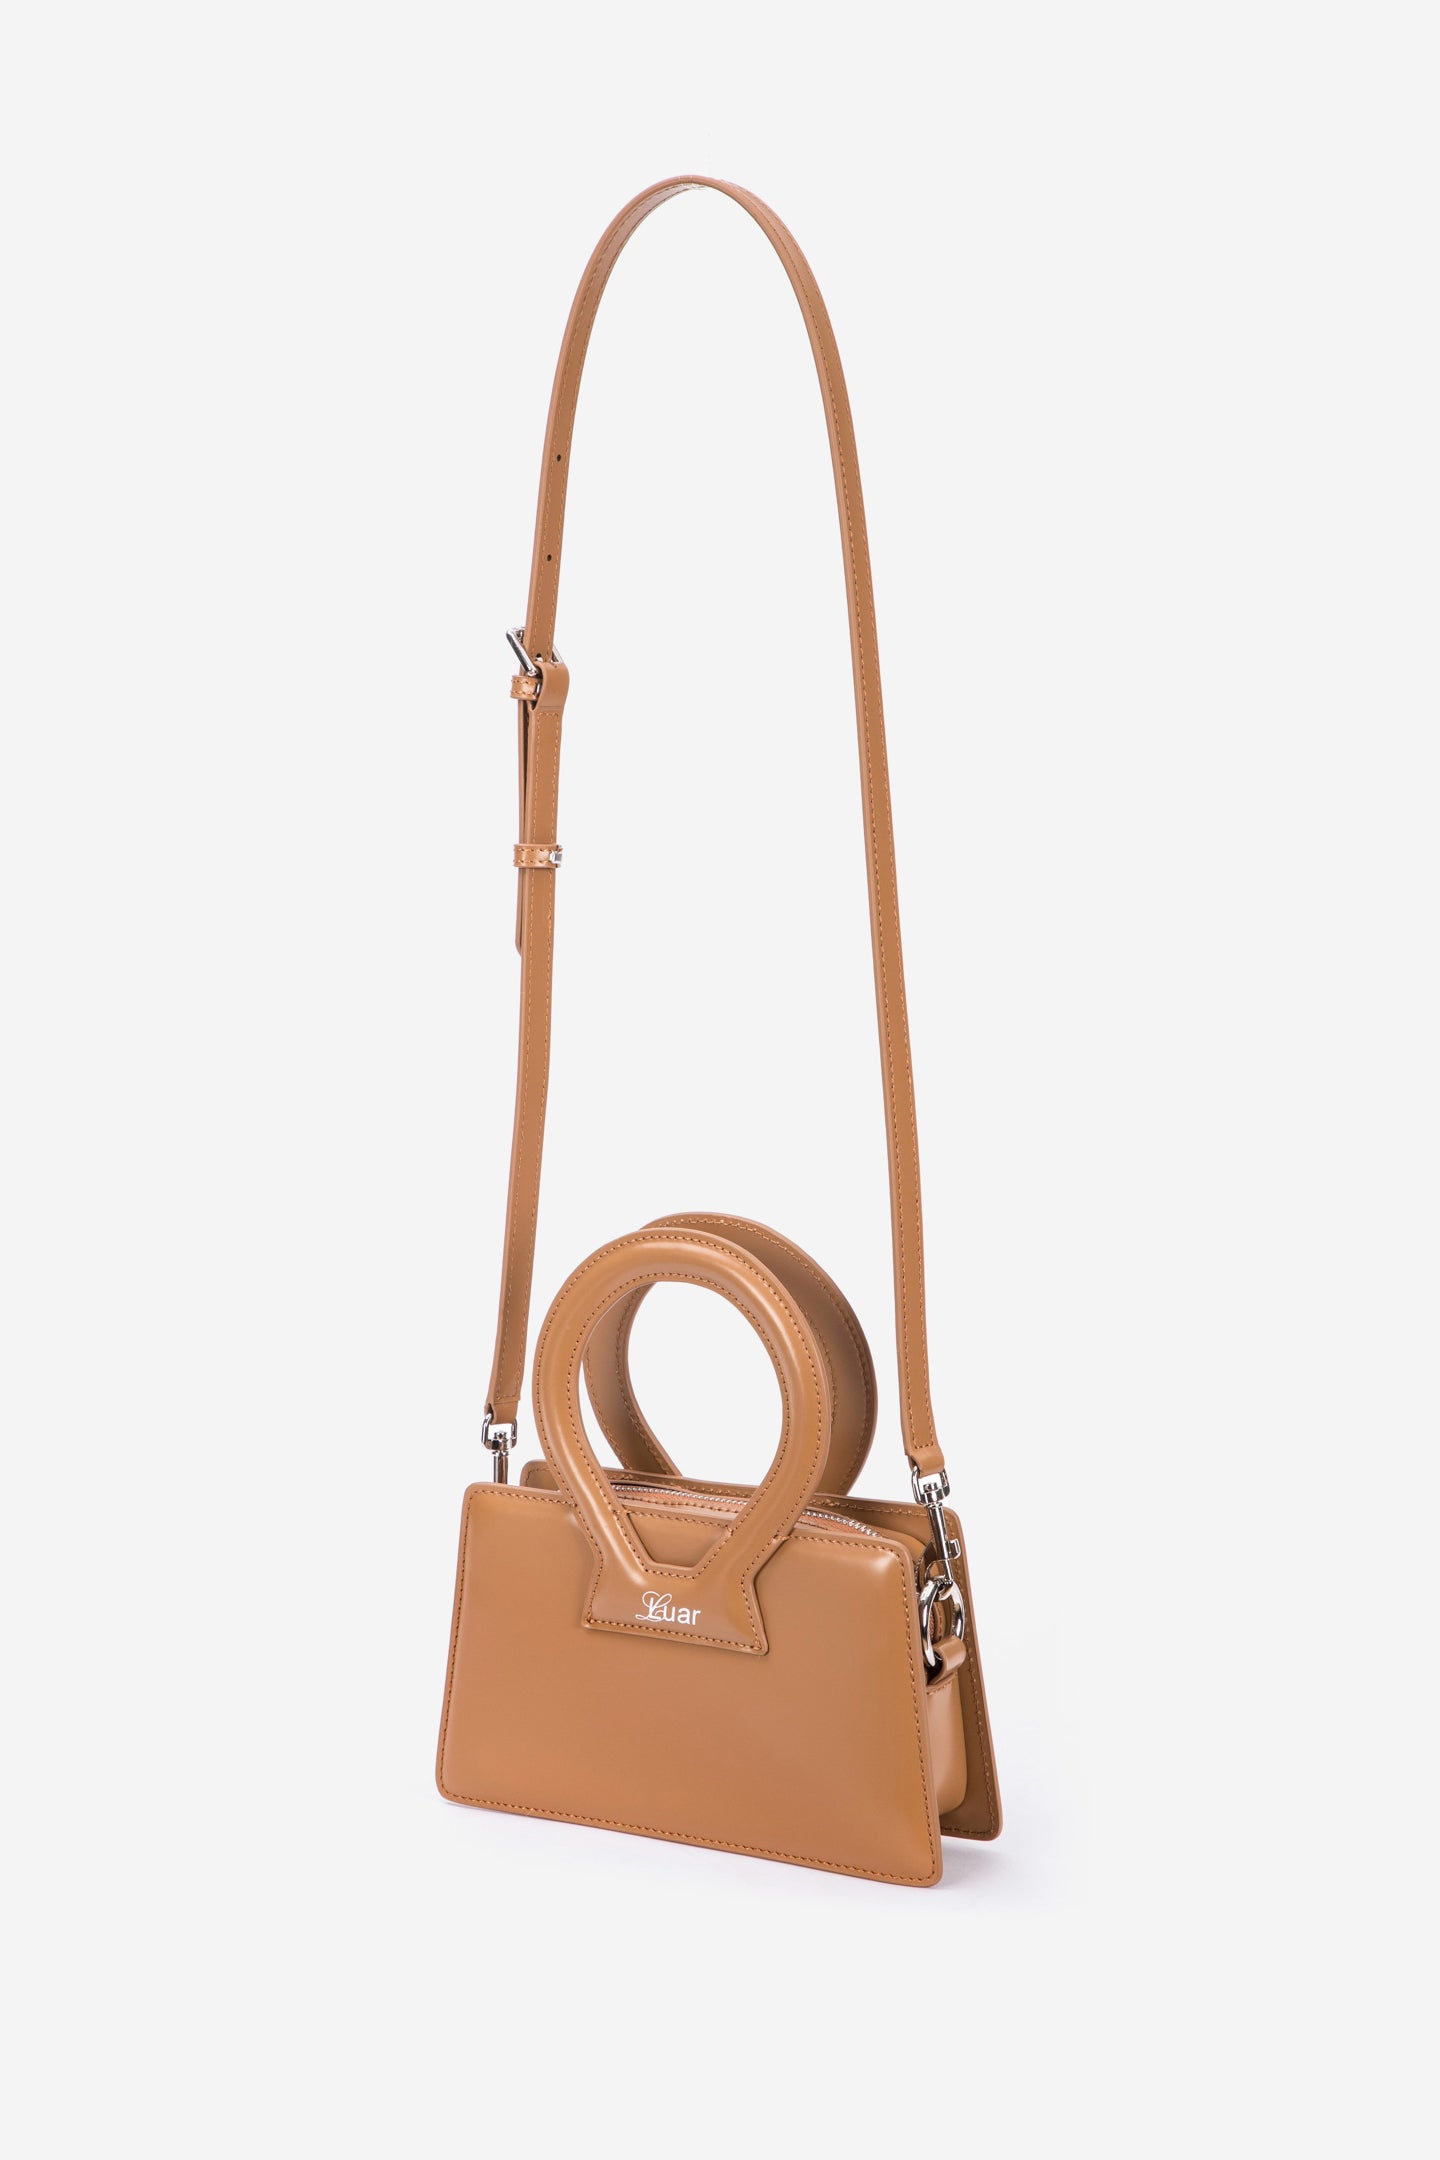 TRES LECHES SMALL ANA BAG